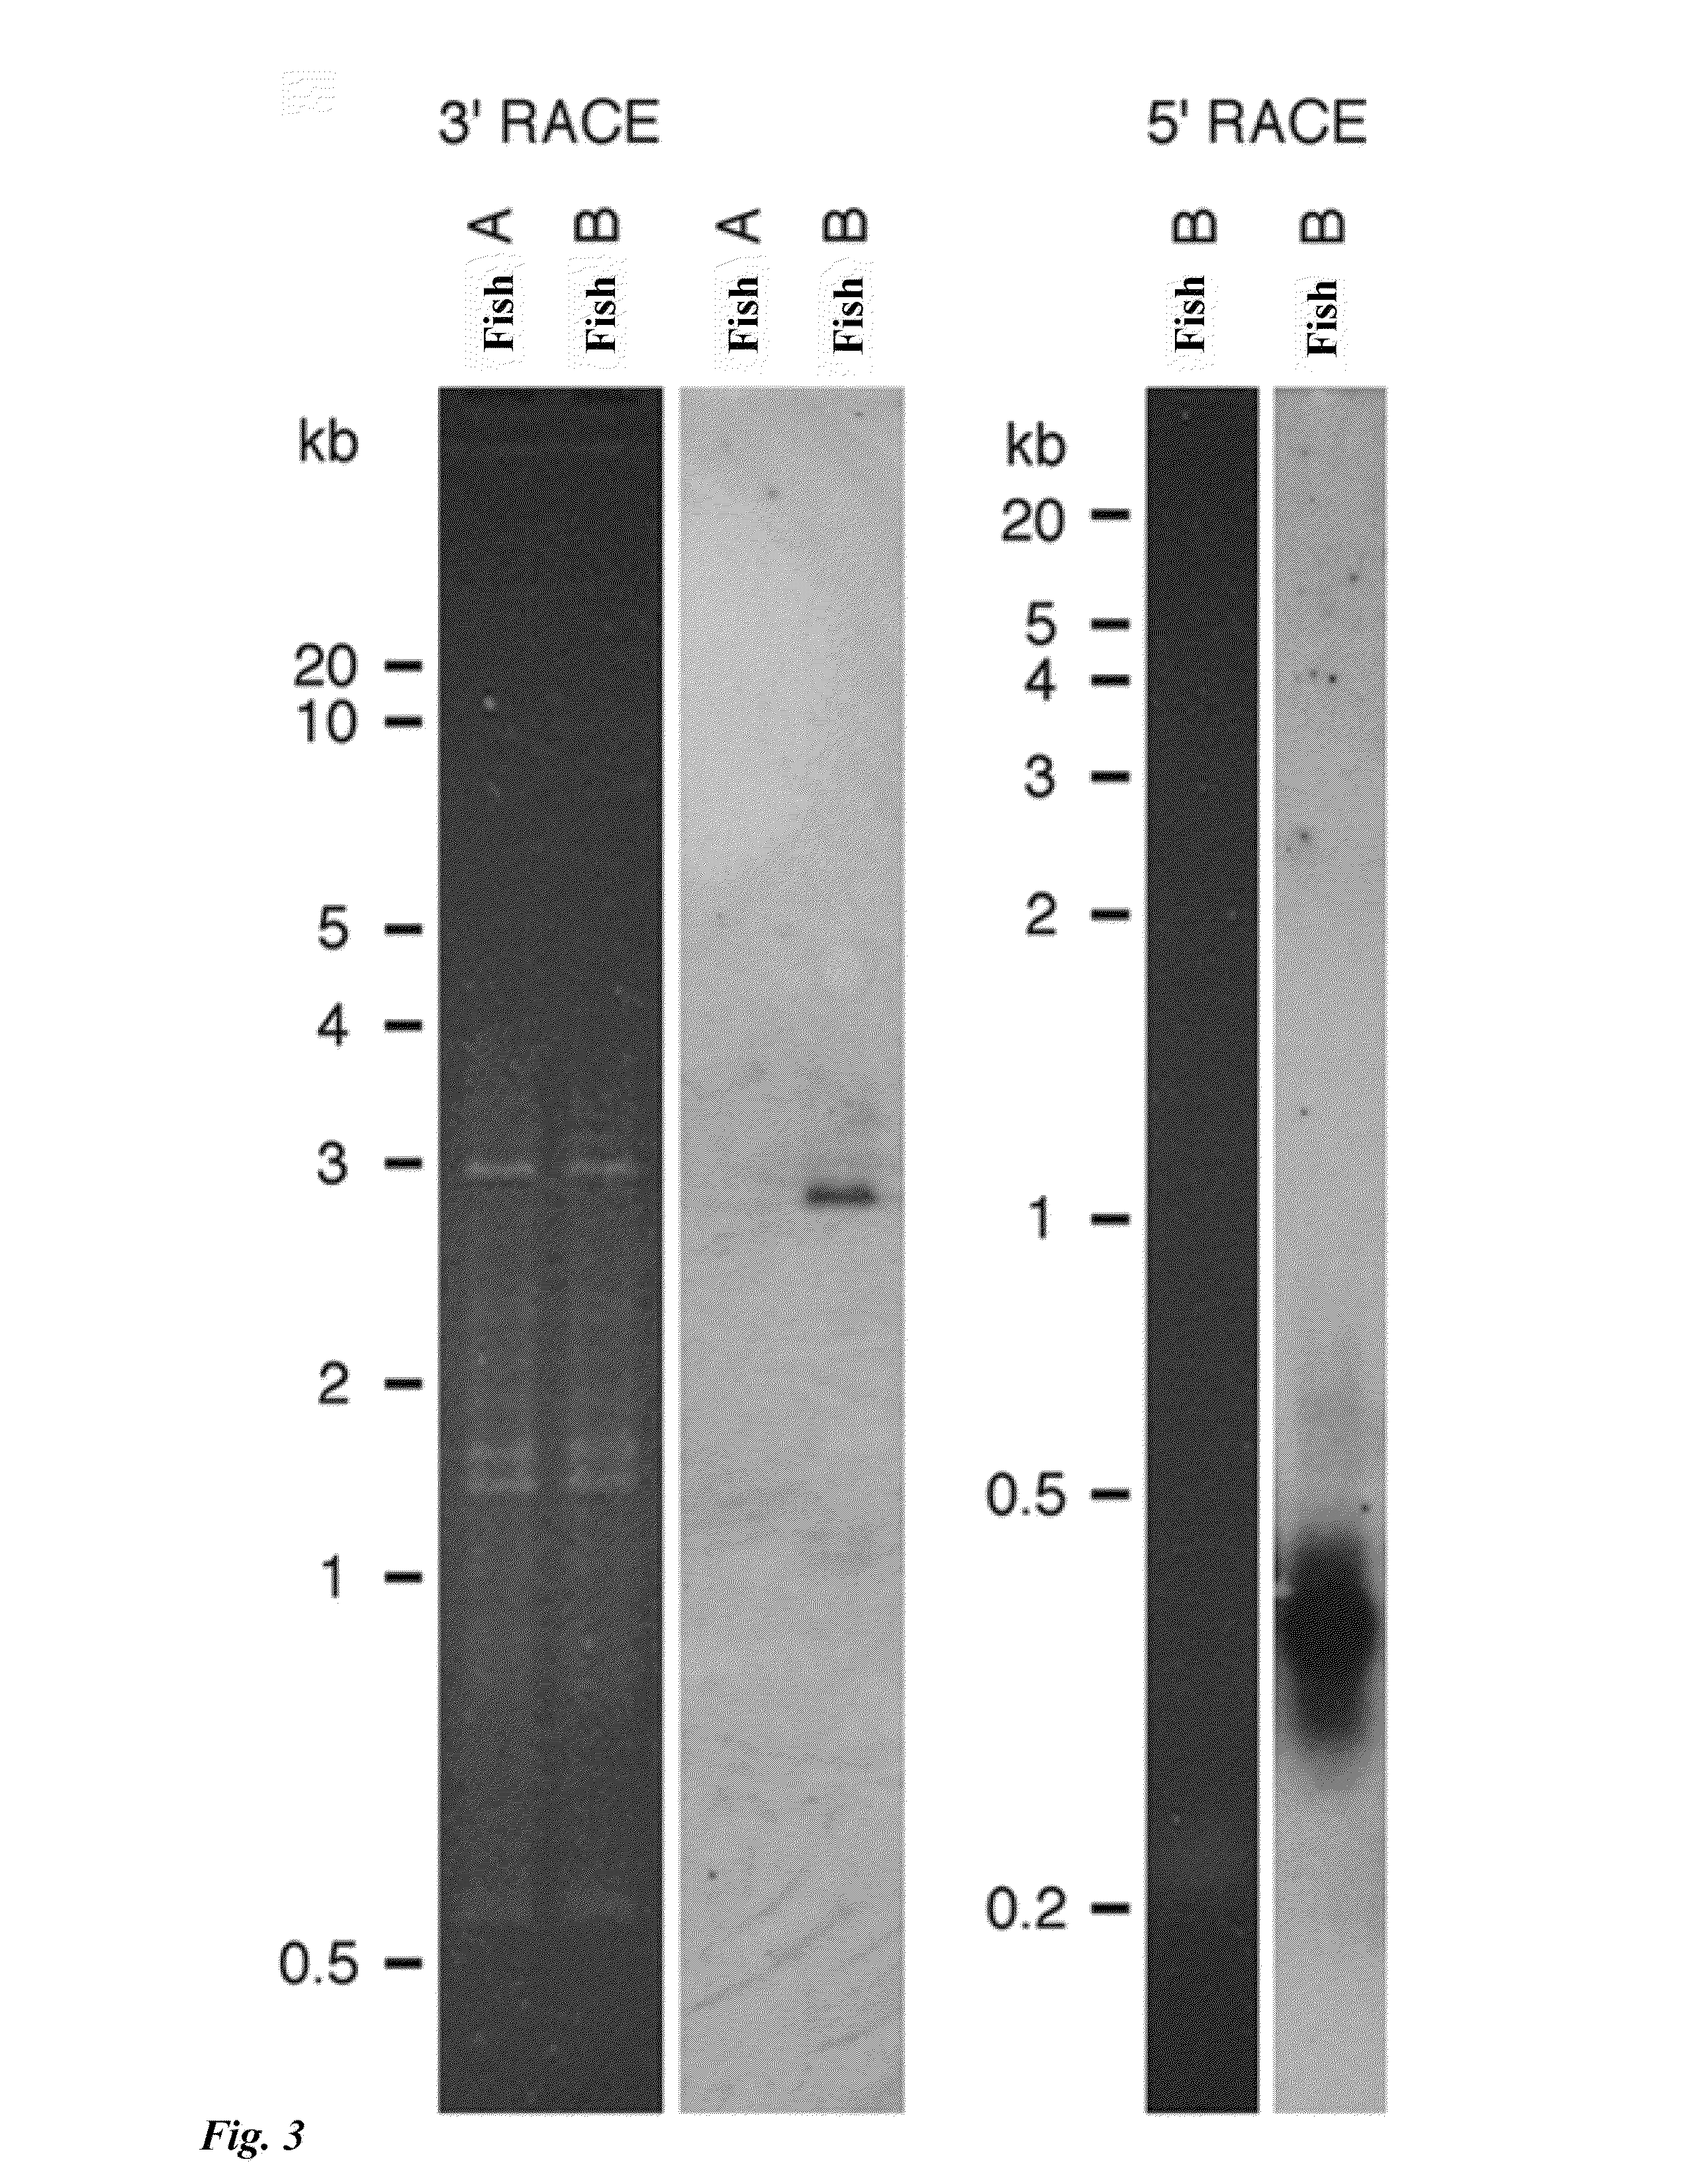 Tol1 factor transposase and DNA introduction system using the same